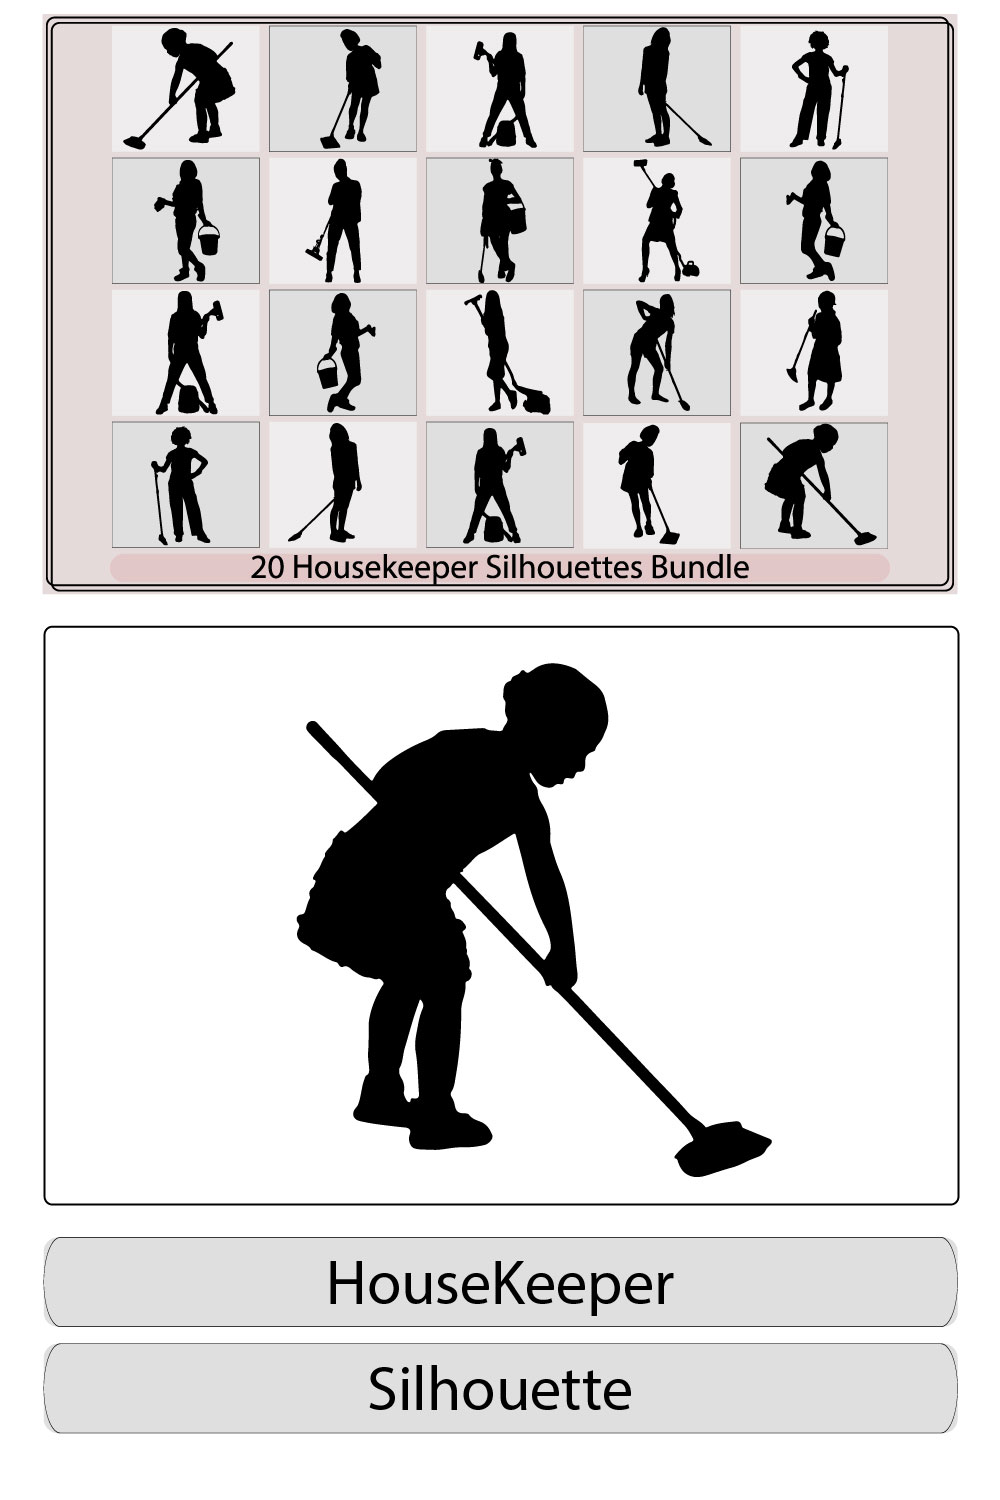 Silhouette of female cleaner,cleaning maid silhouette vector illustration Housemaid,Maid Silhouette, Woman Housekeeper, House Cleaning Service illustration Vector pinterest preview image.